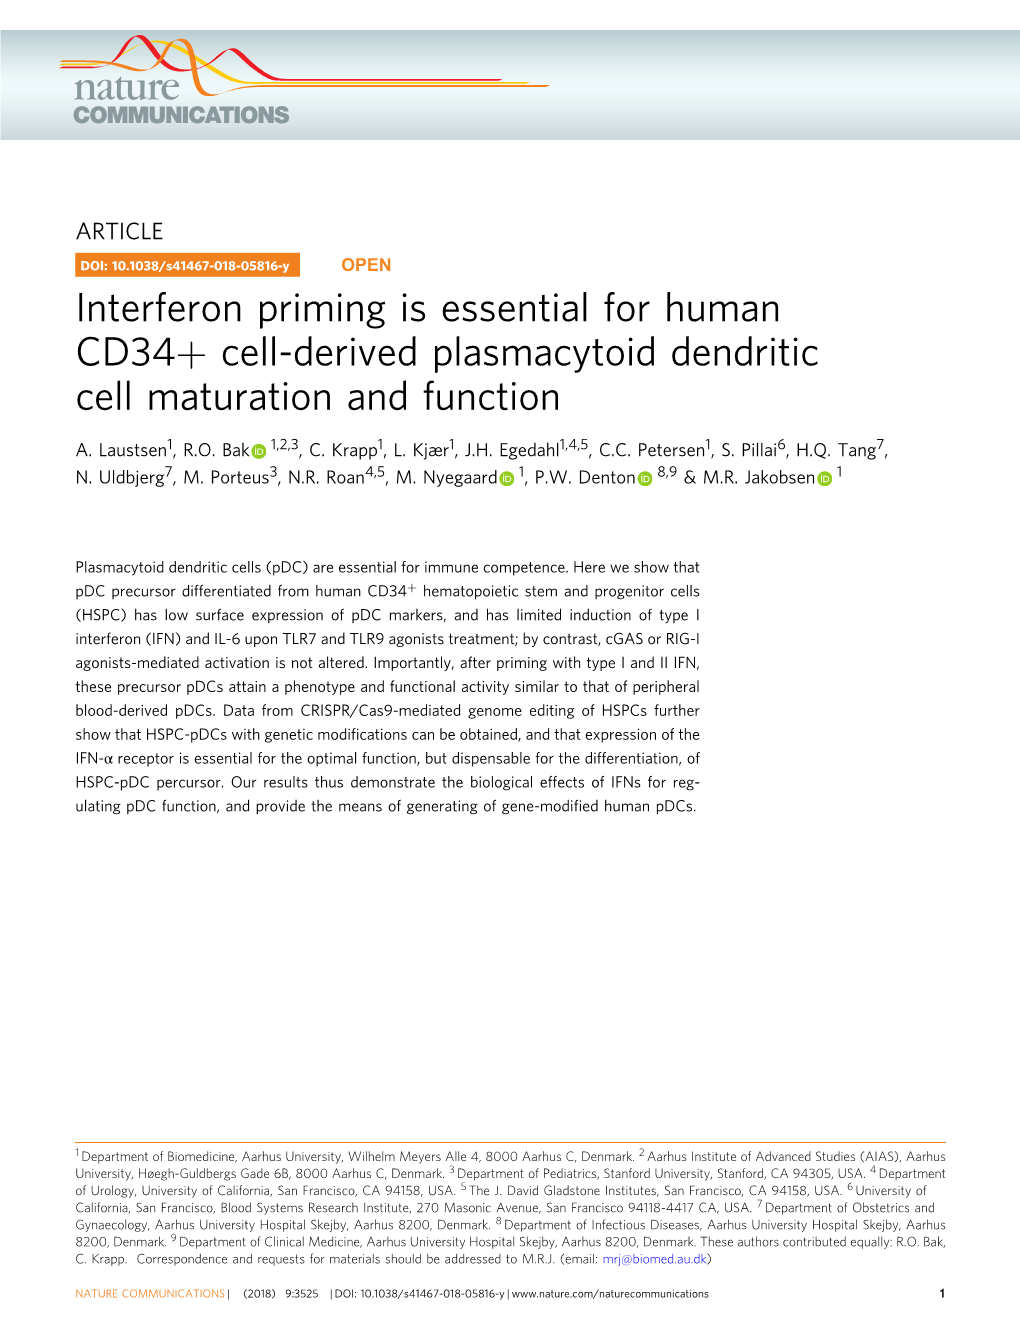 Interferon Priming Is Essential for Human CD34+ Cell-Derived Plasmacytoid Dendritic Cell Maturation and Function